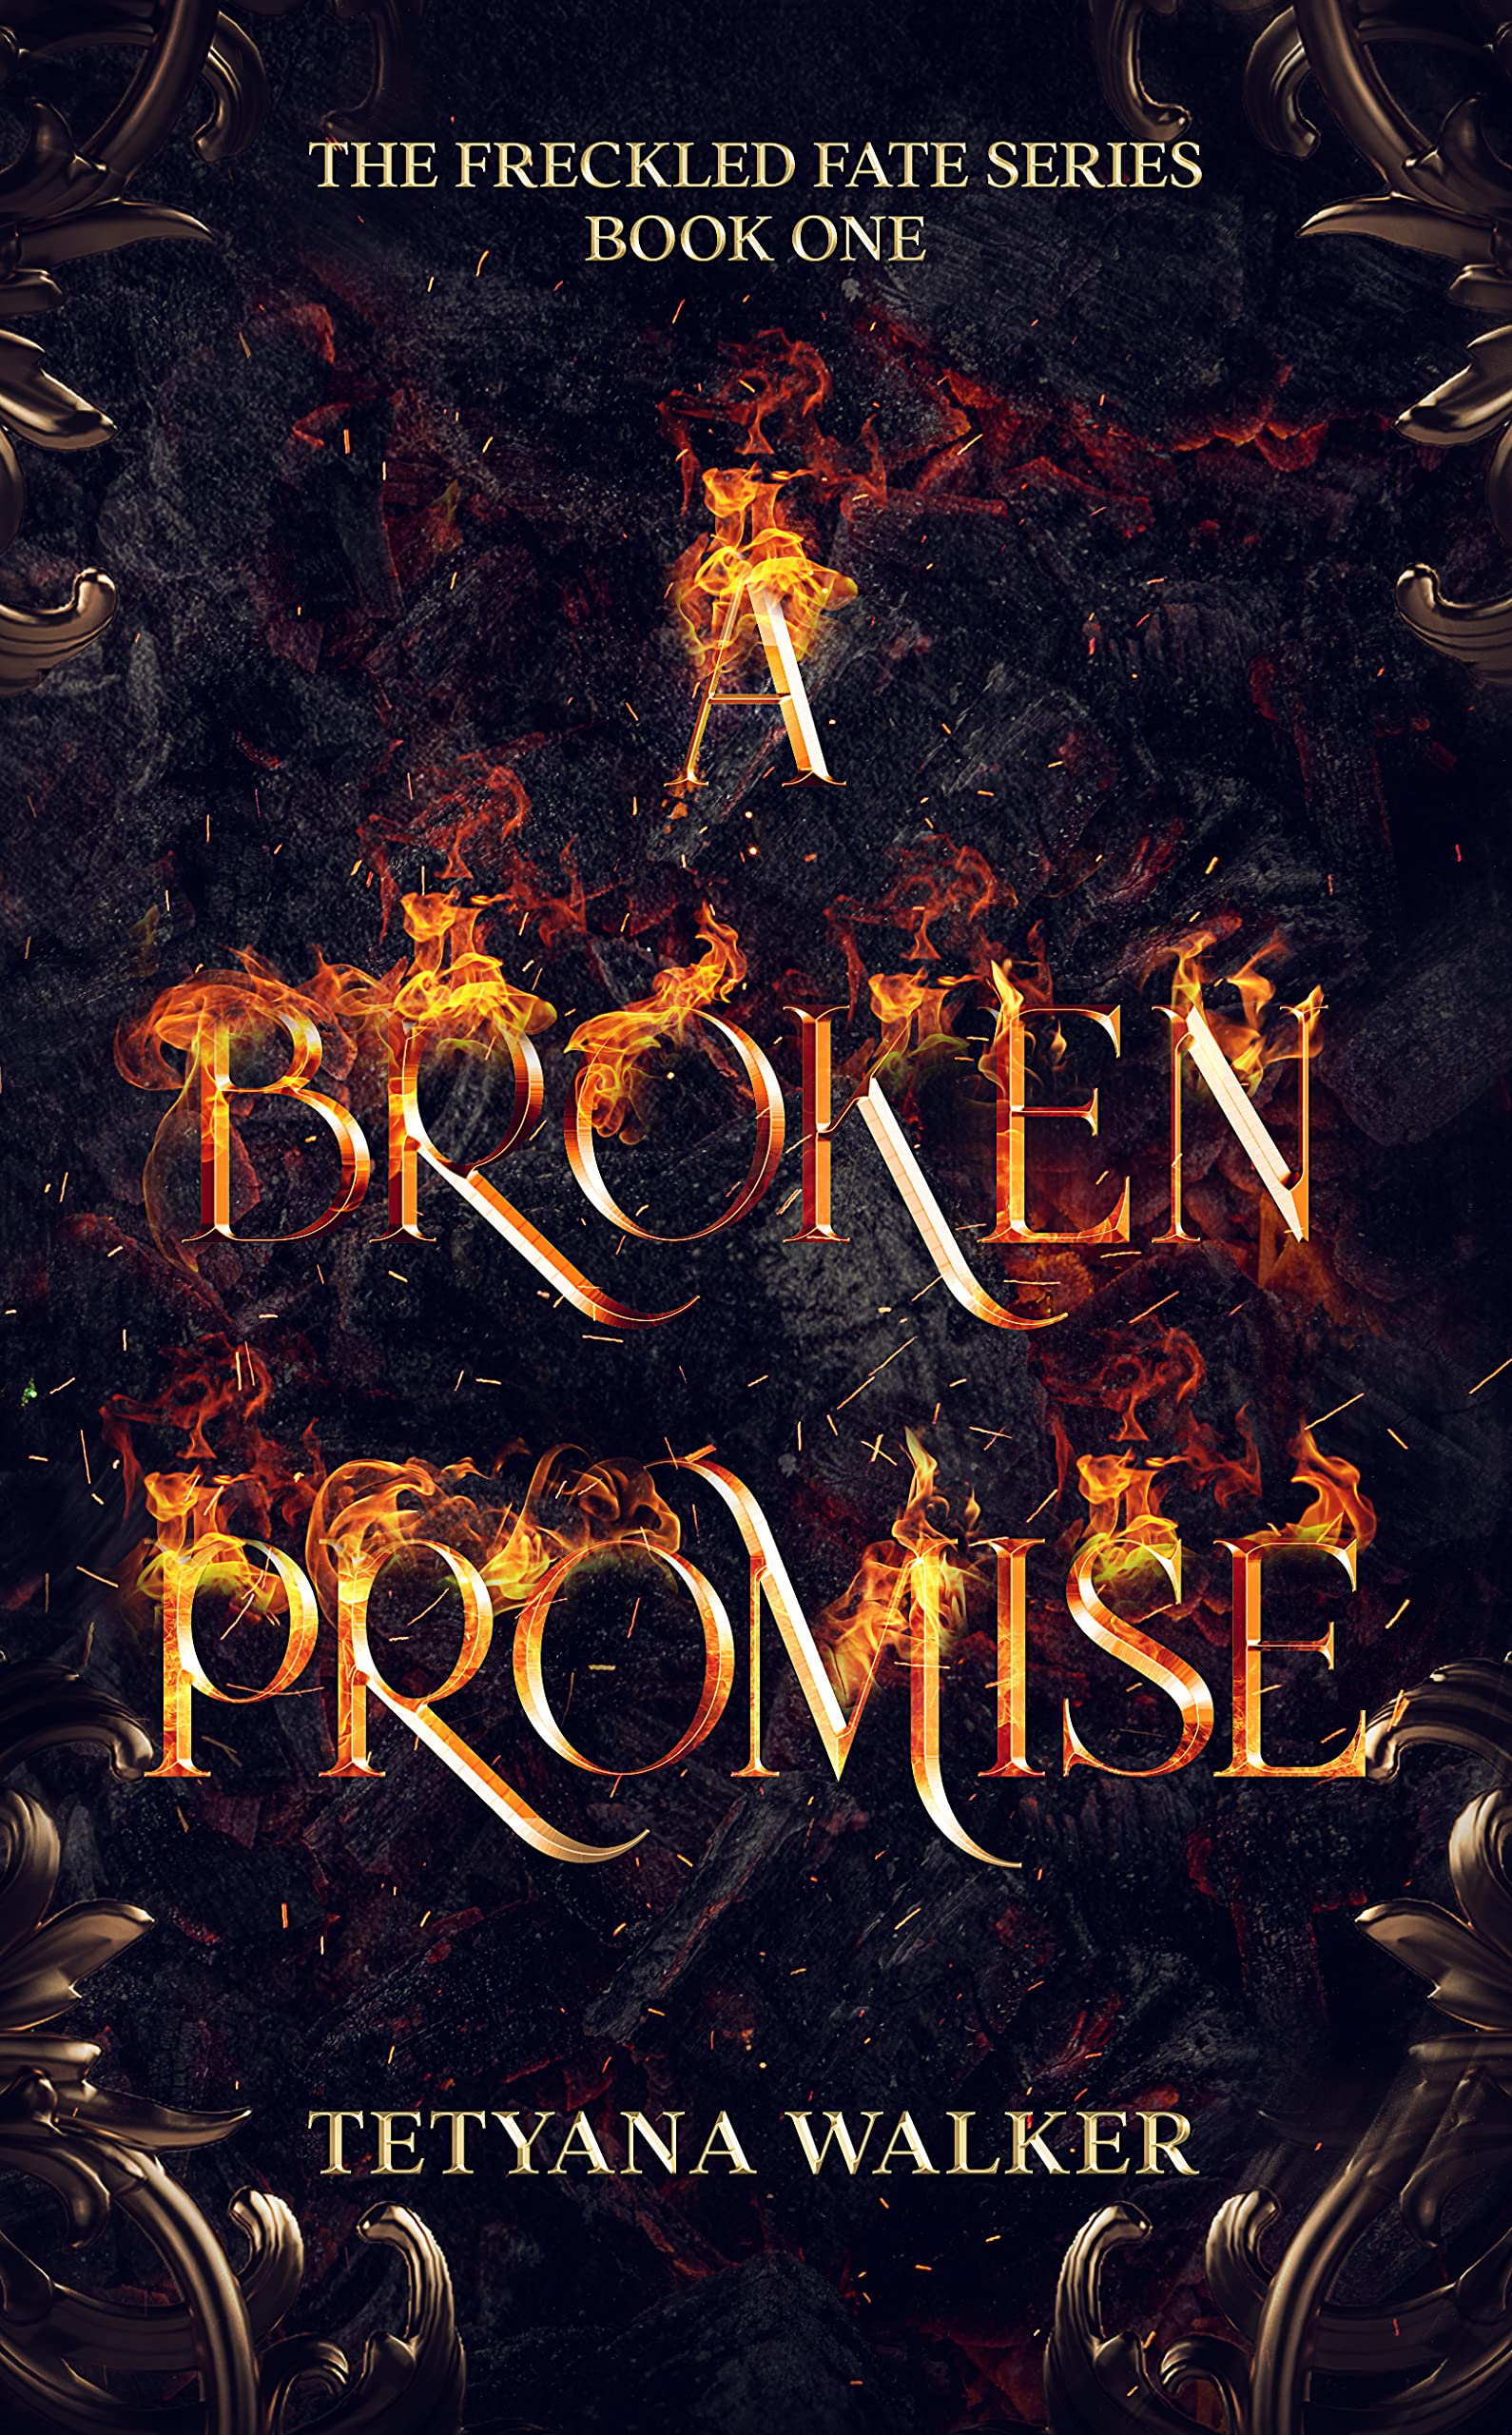 A Broken Promise: Book 1 in the Freckled Fate Trilogy